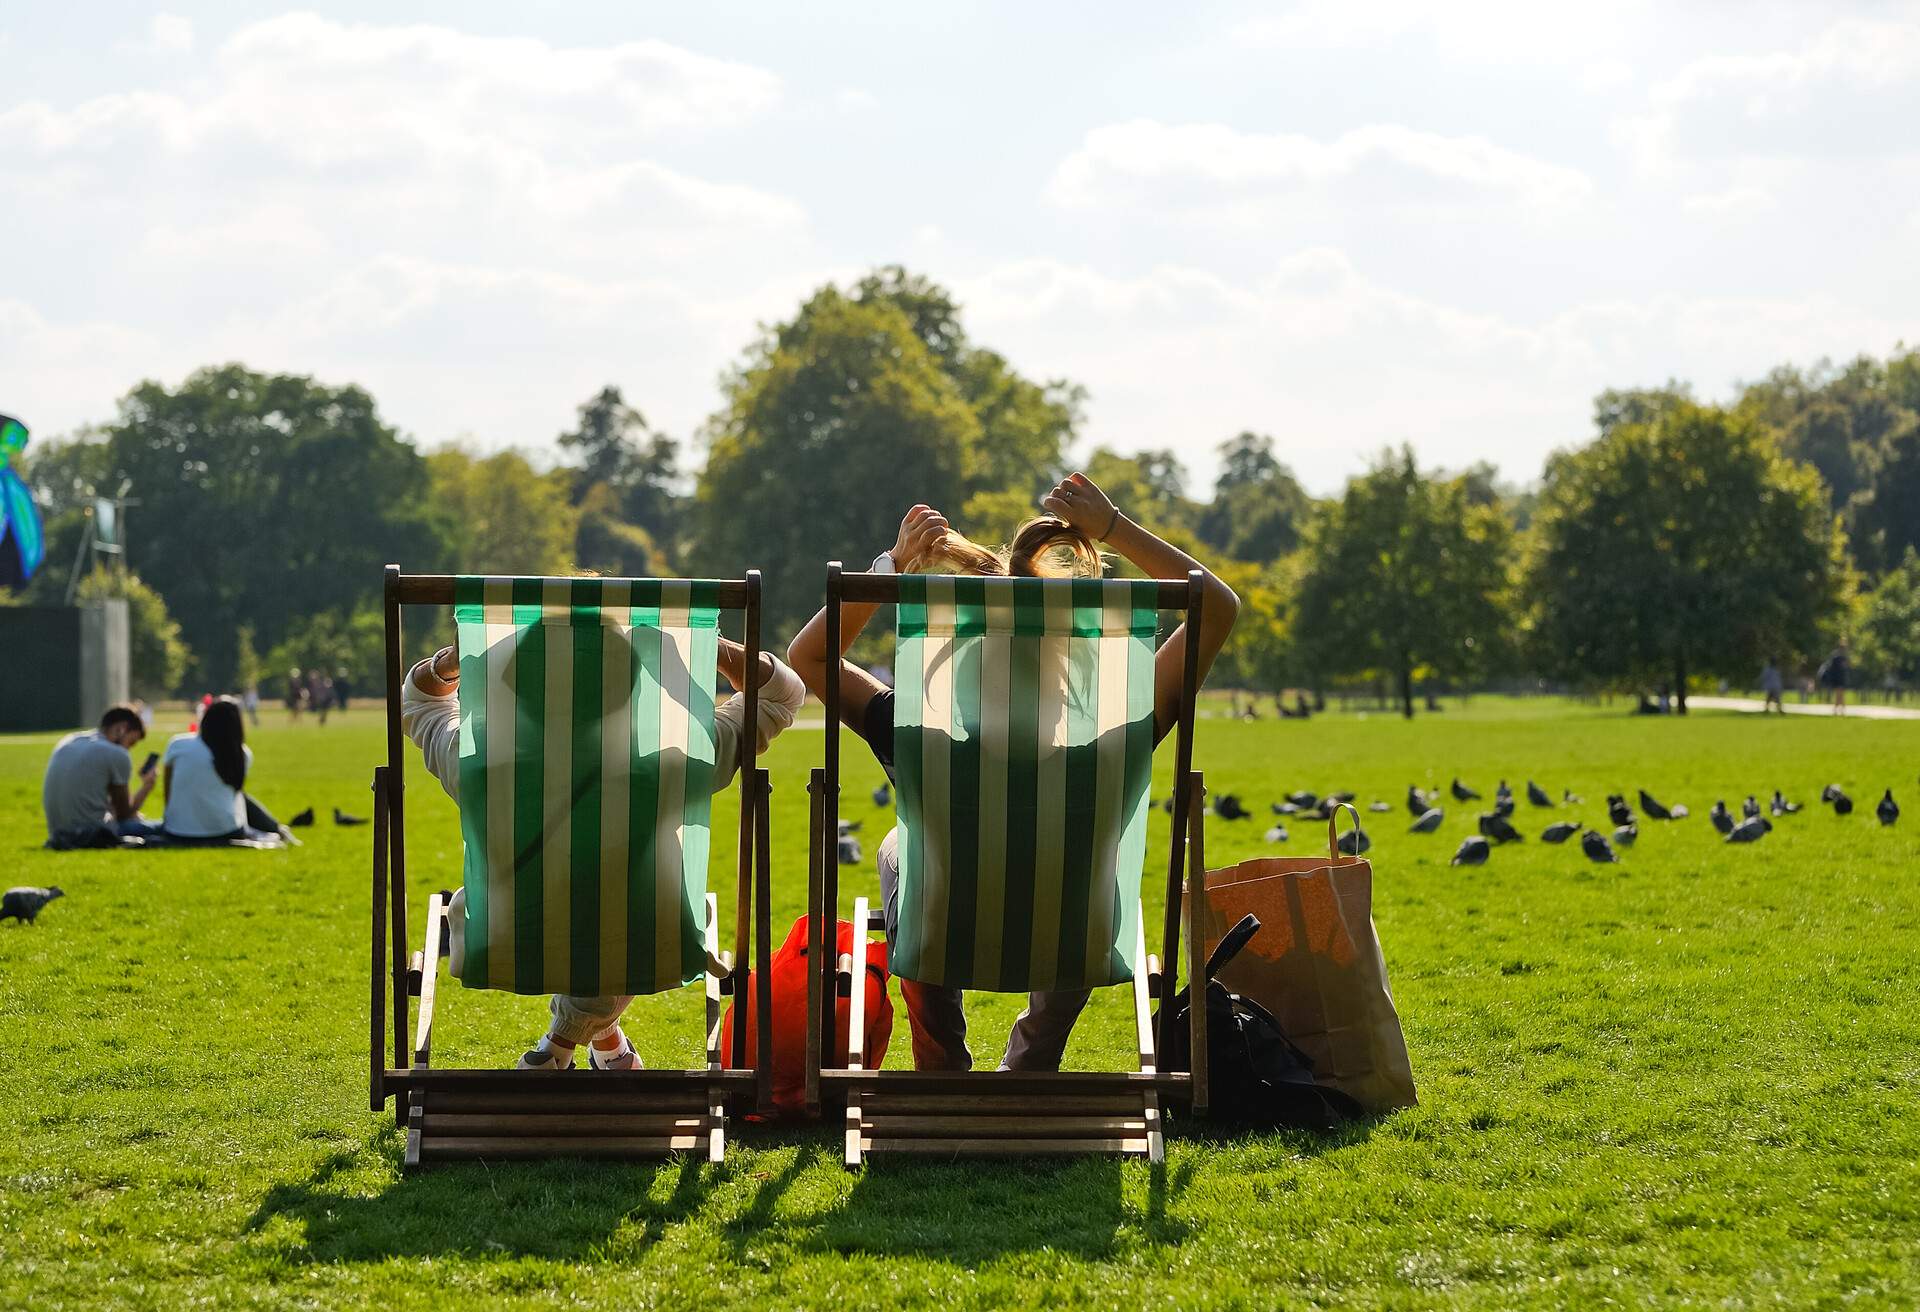 Two people sit on foldable chairs in front of a green park filled with birds and people lounging.